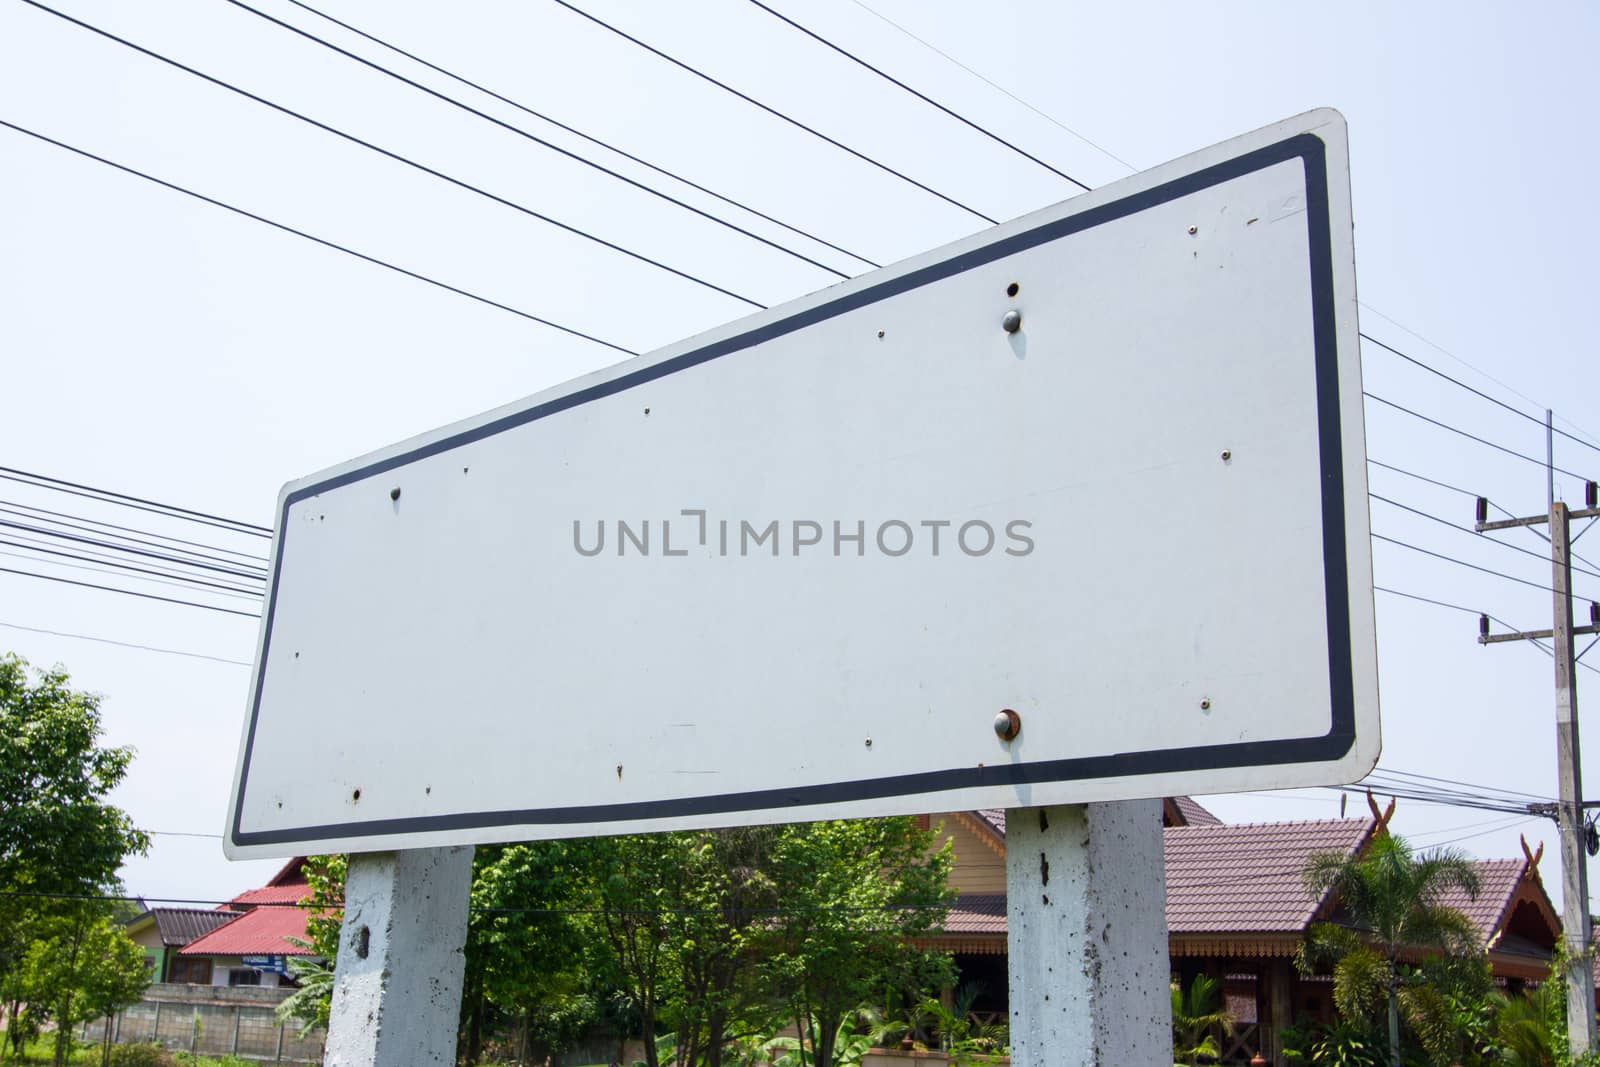 road with sign pole with blank space in Thailand